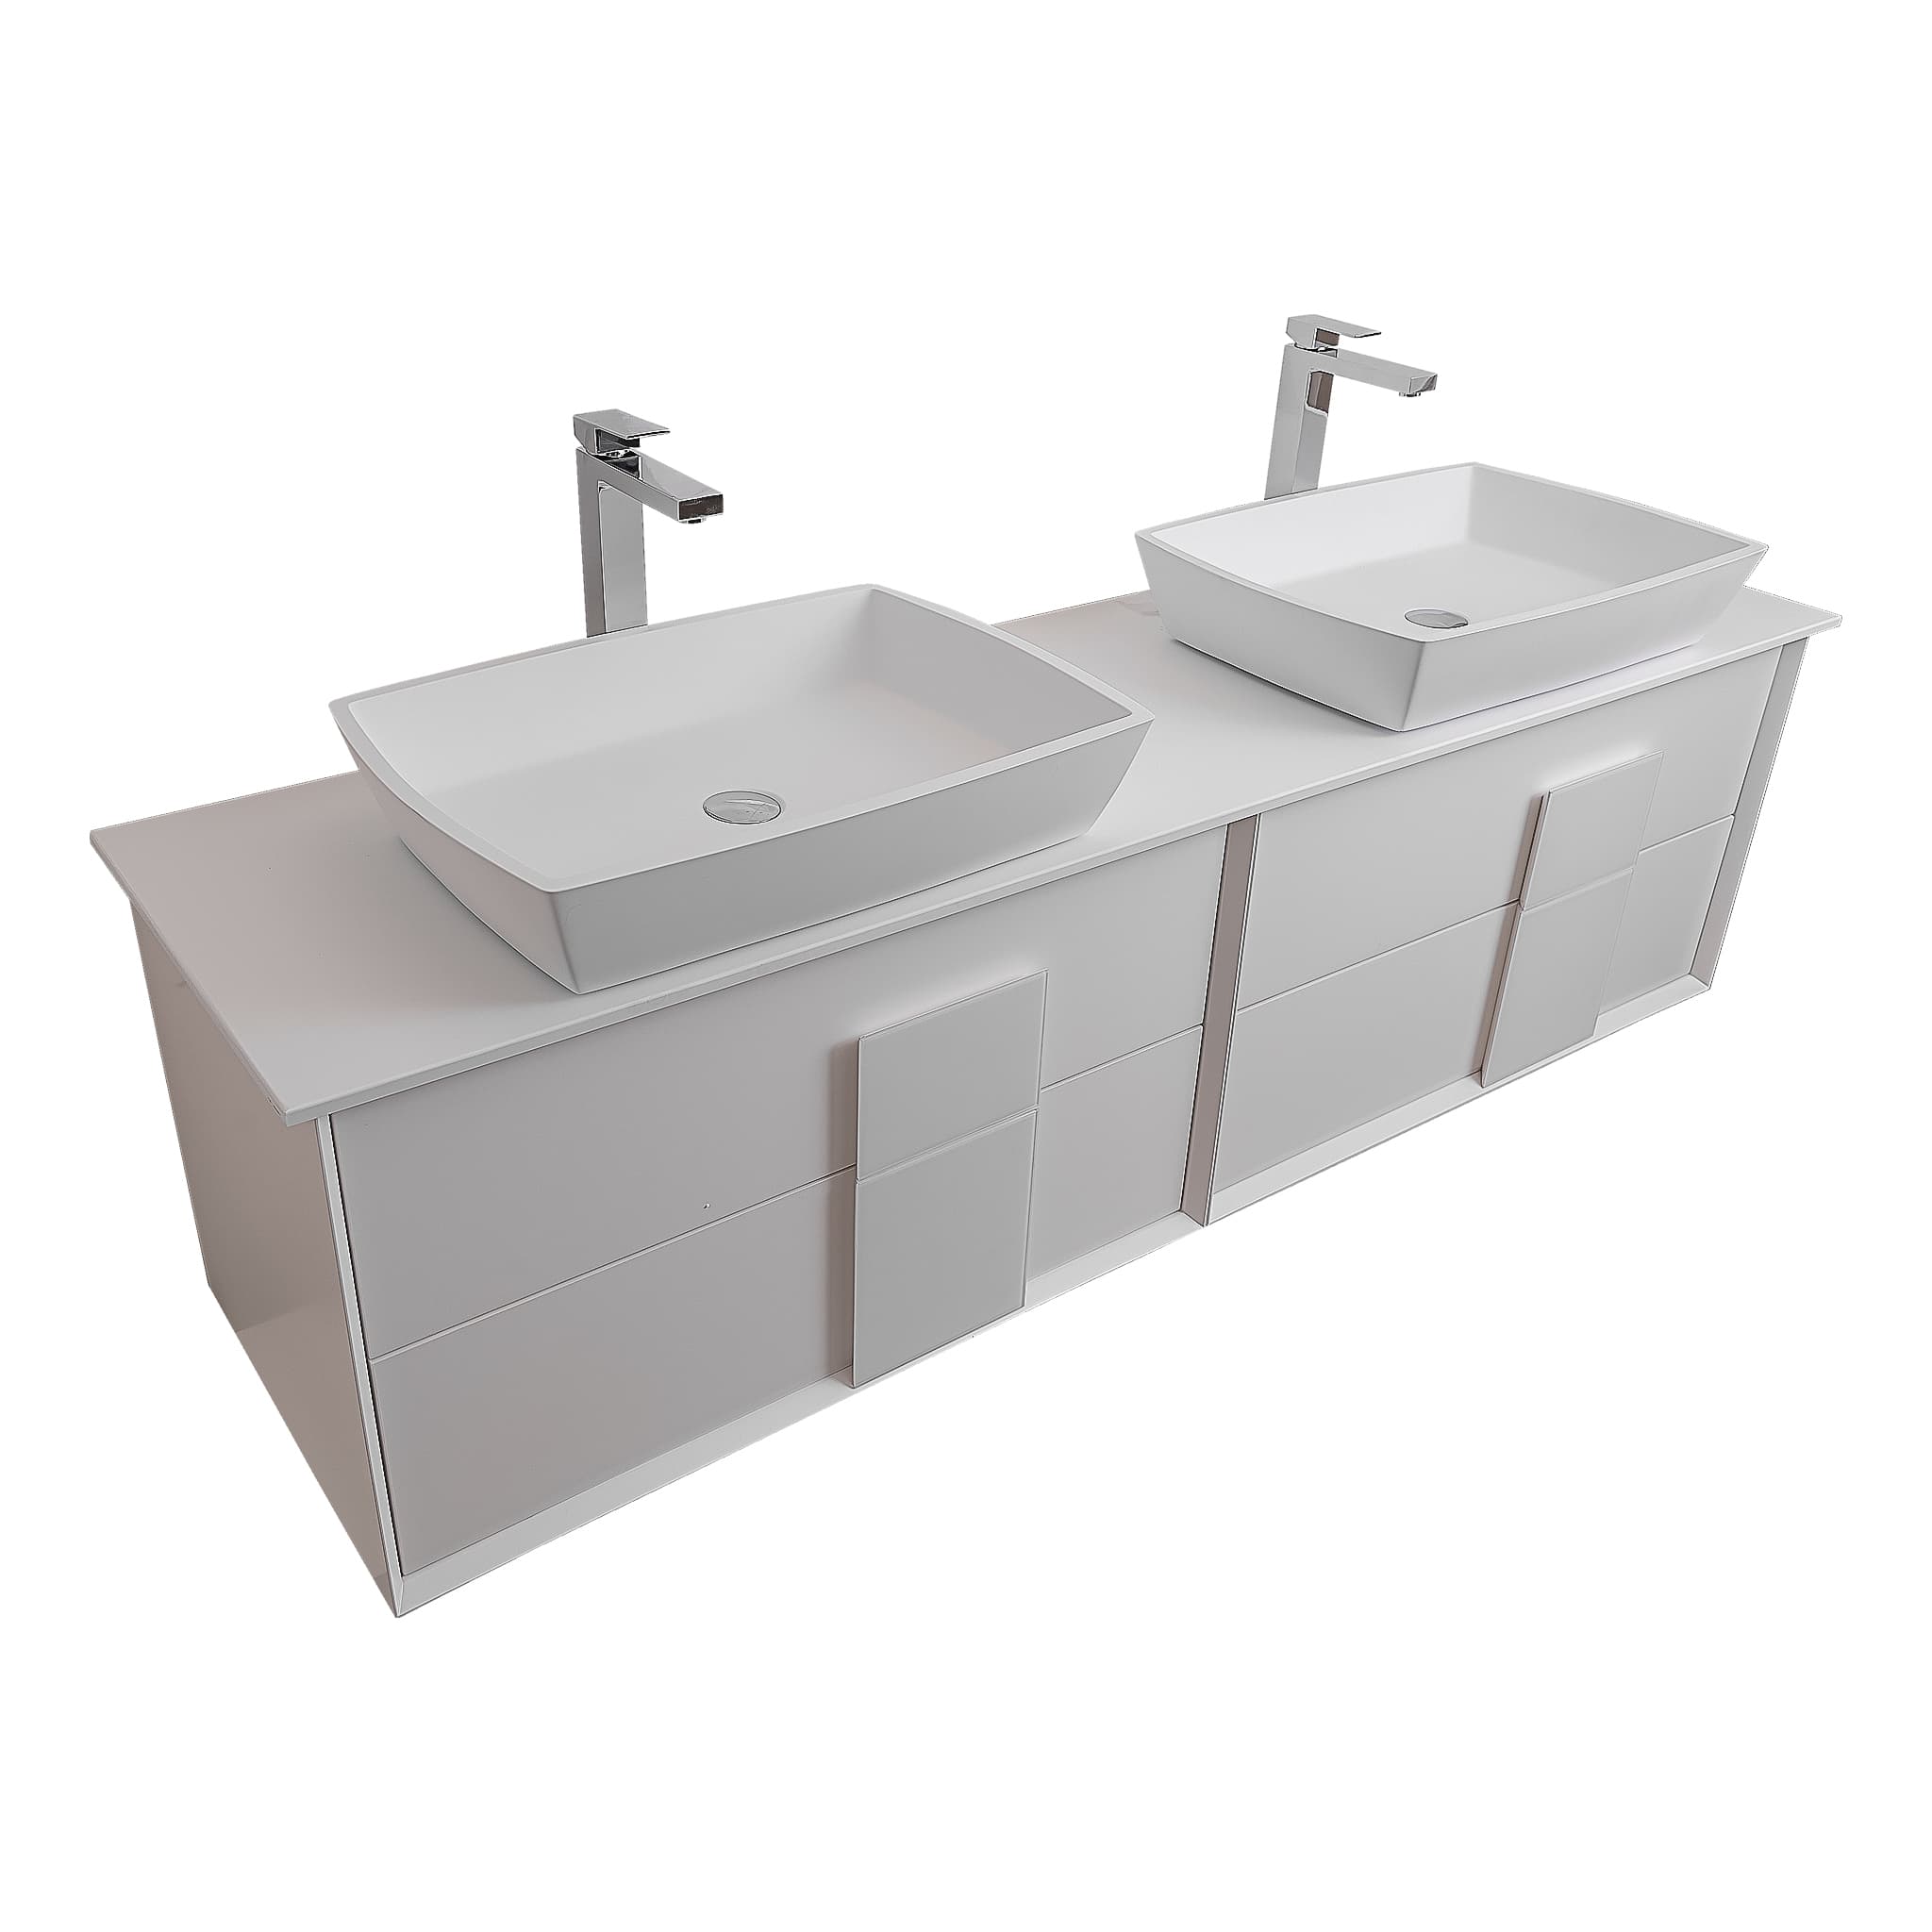 Piazza 63 Matte White With White Handle Cabinet, Solid Surface Flat White Counter and Two Square Solid Surface White Basin 1316, Wall Mounted Modern Vanity Set